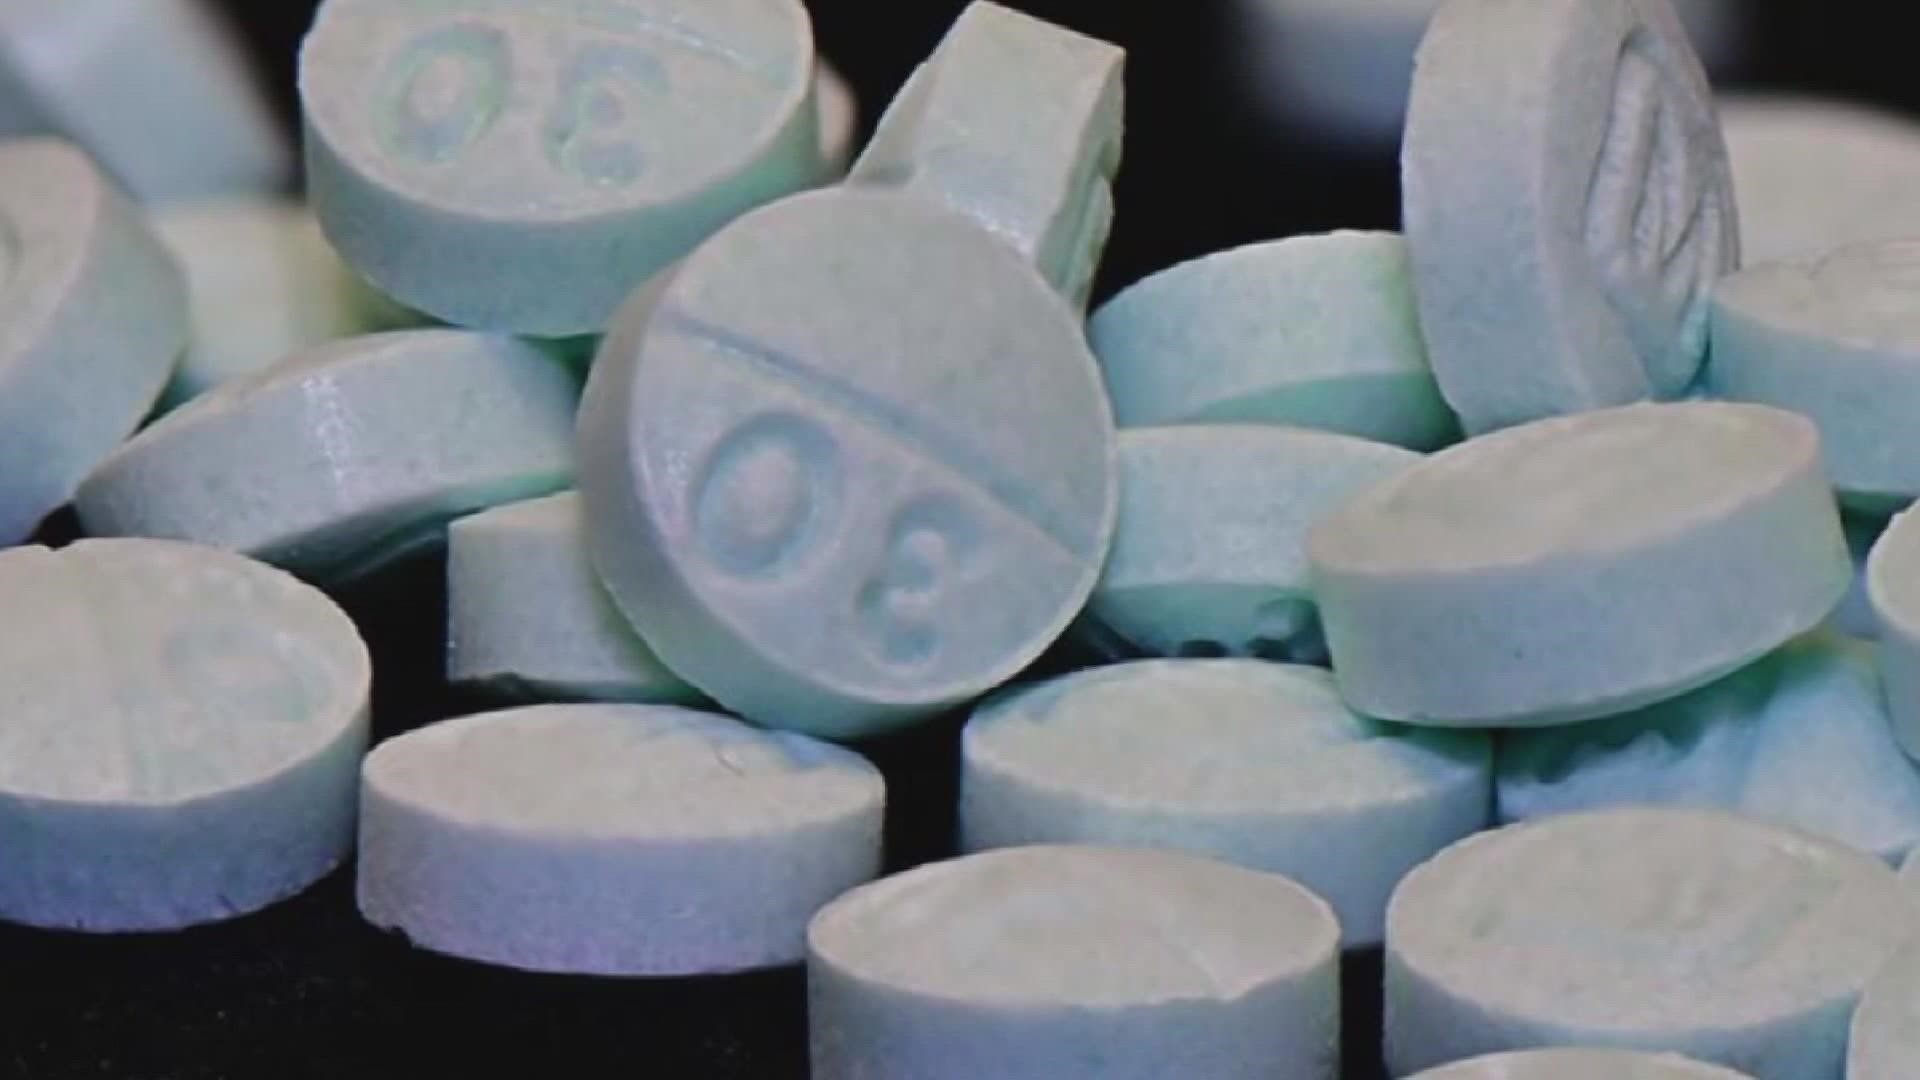 King County Prosecutors say they are working to hold drug dealers accountable. In the last five months of 2022, 67 fentanyl dealing charges were filed.